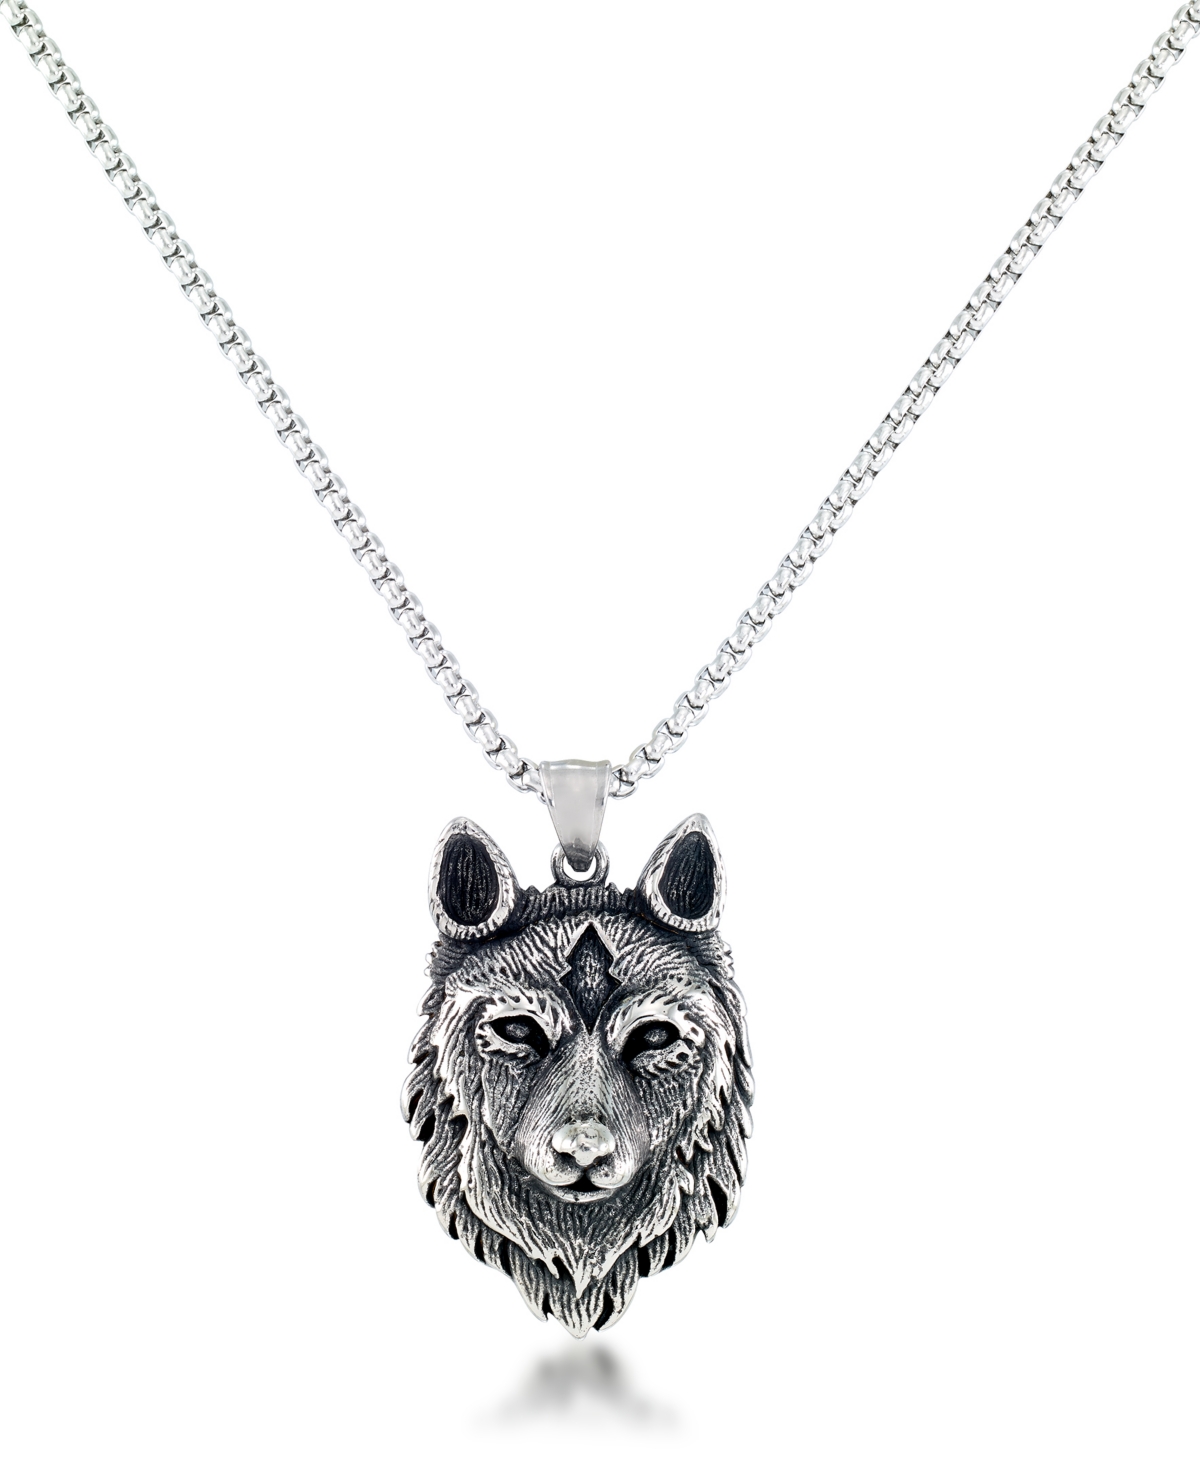 Andrew Charles by Andy Hilfiger Men's Wolf Head 24" Pendant Necklace in Stainless Steel